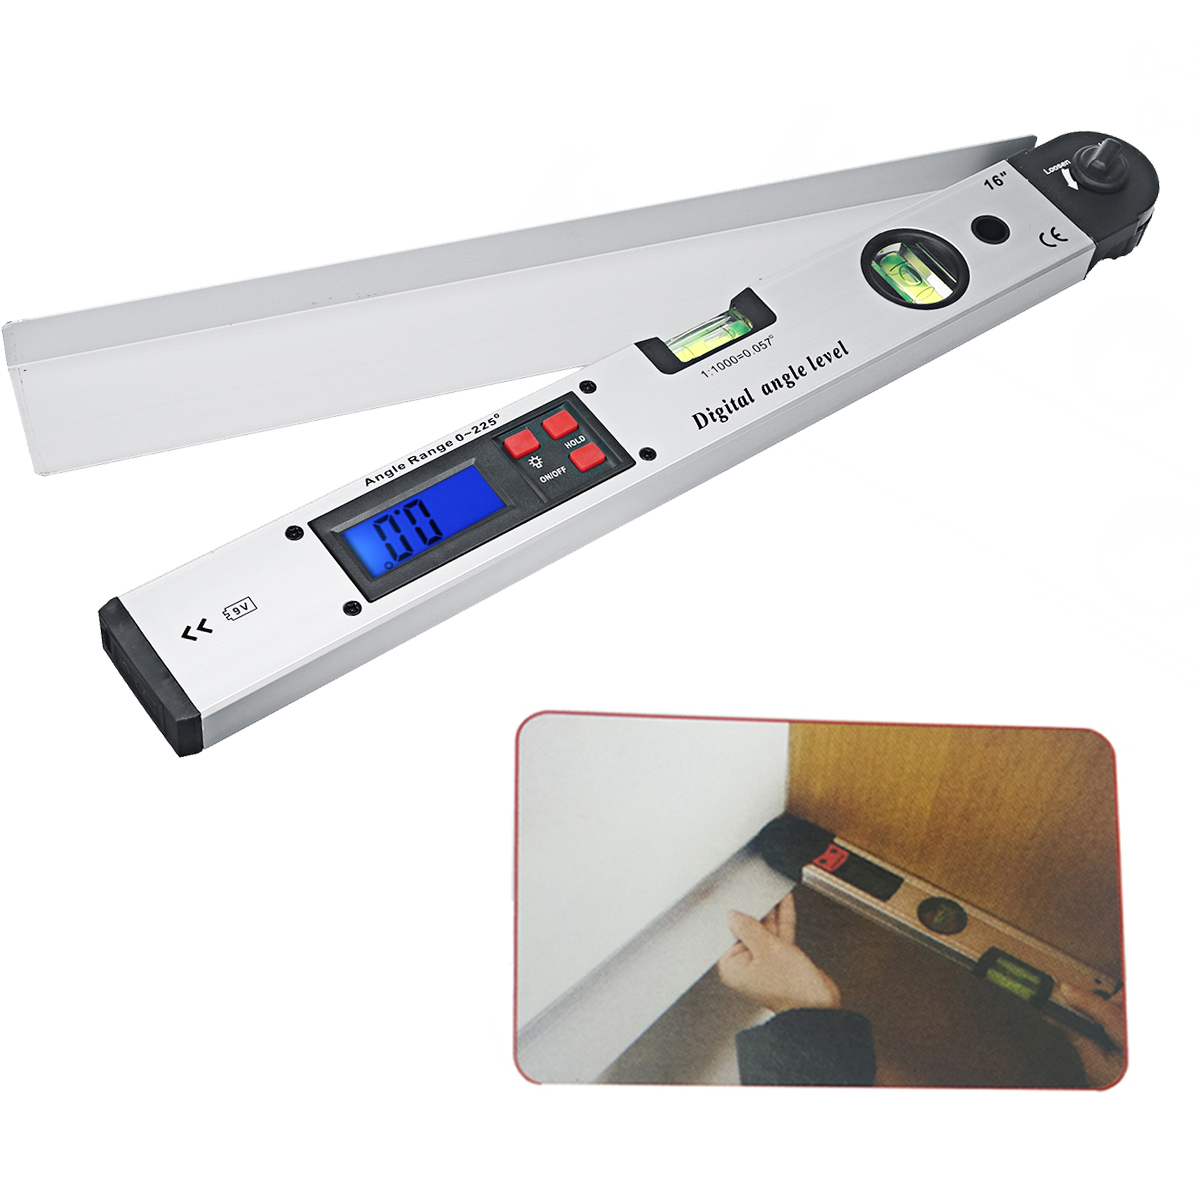 250400mm-Digital-Angle-Level-Meter-LCD-Display-0-225-Degree-for-Measuring-Roof-Angles-Fitting-Up-Win-1740234-6